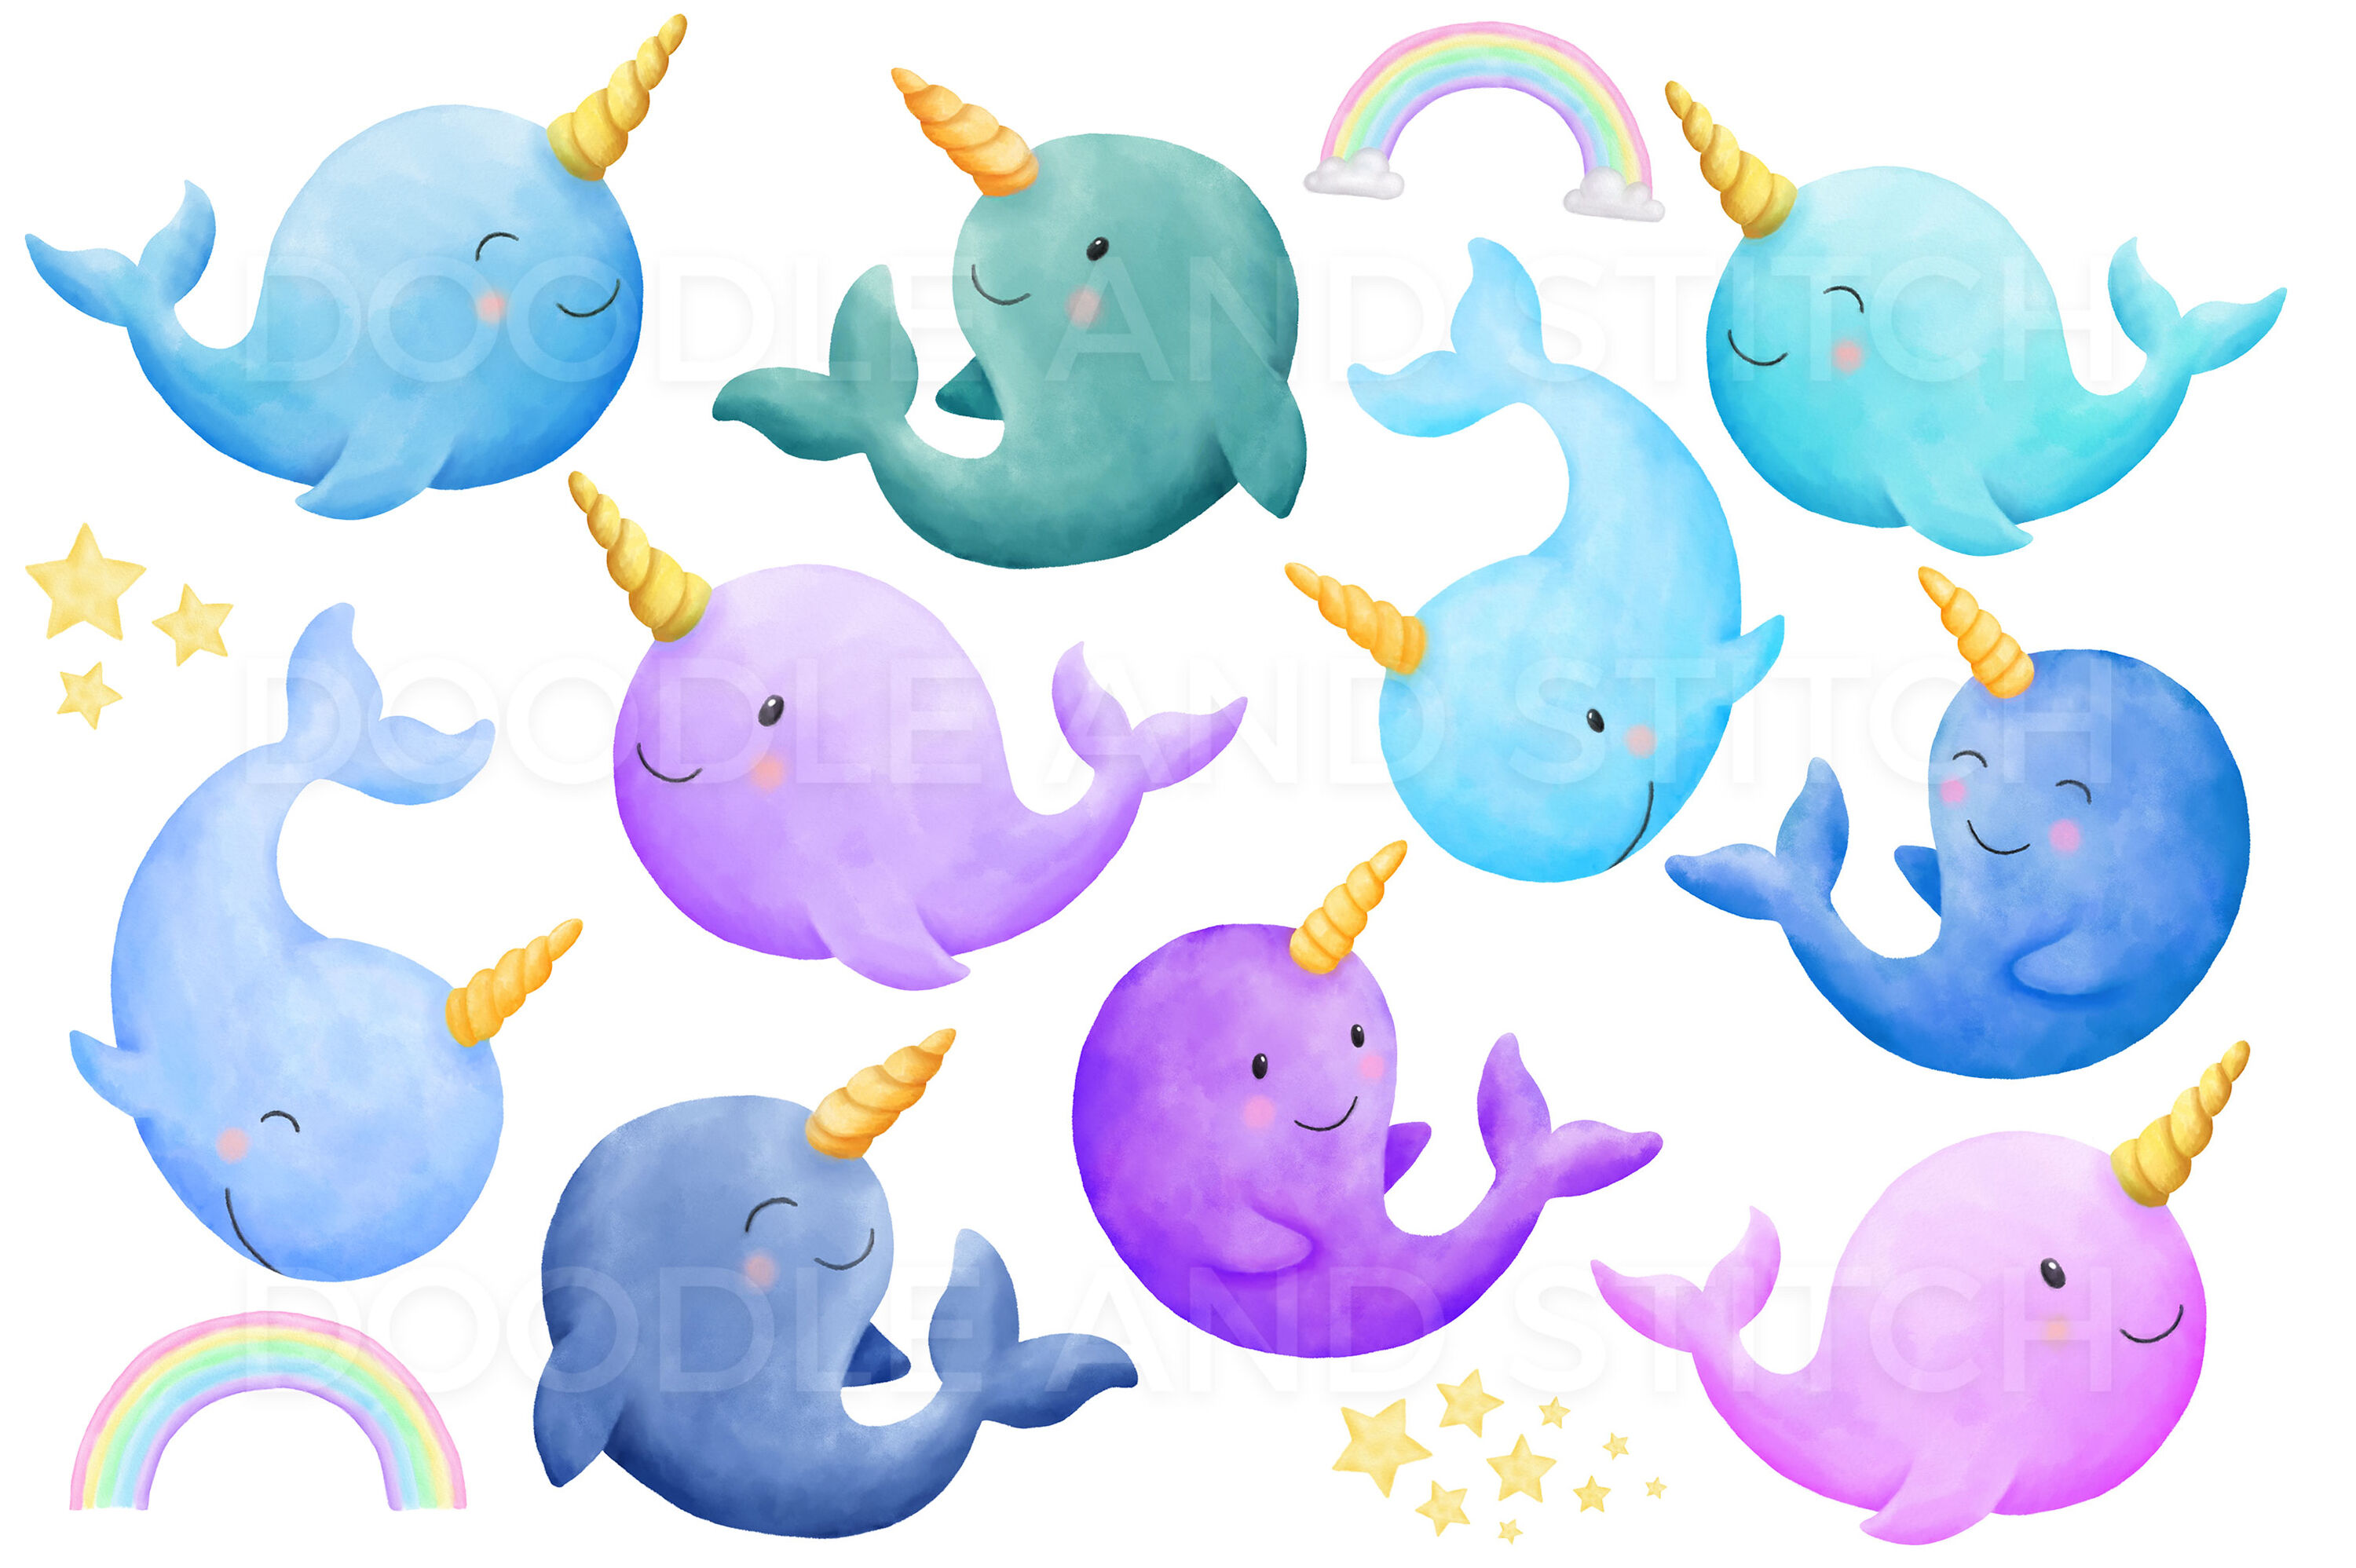 Cute Narwhal Watercolor Illustrations By Doodle Art TheHungryJPEG